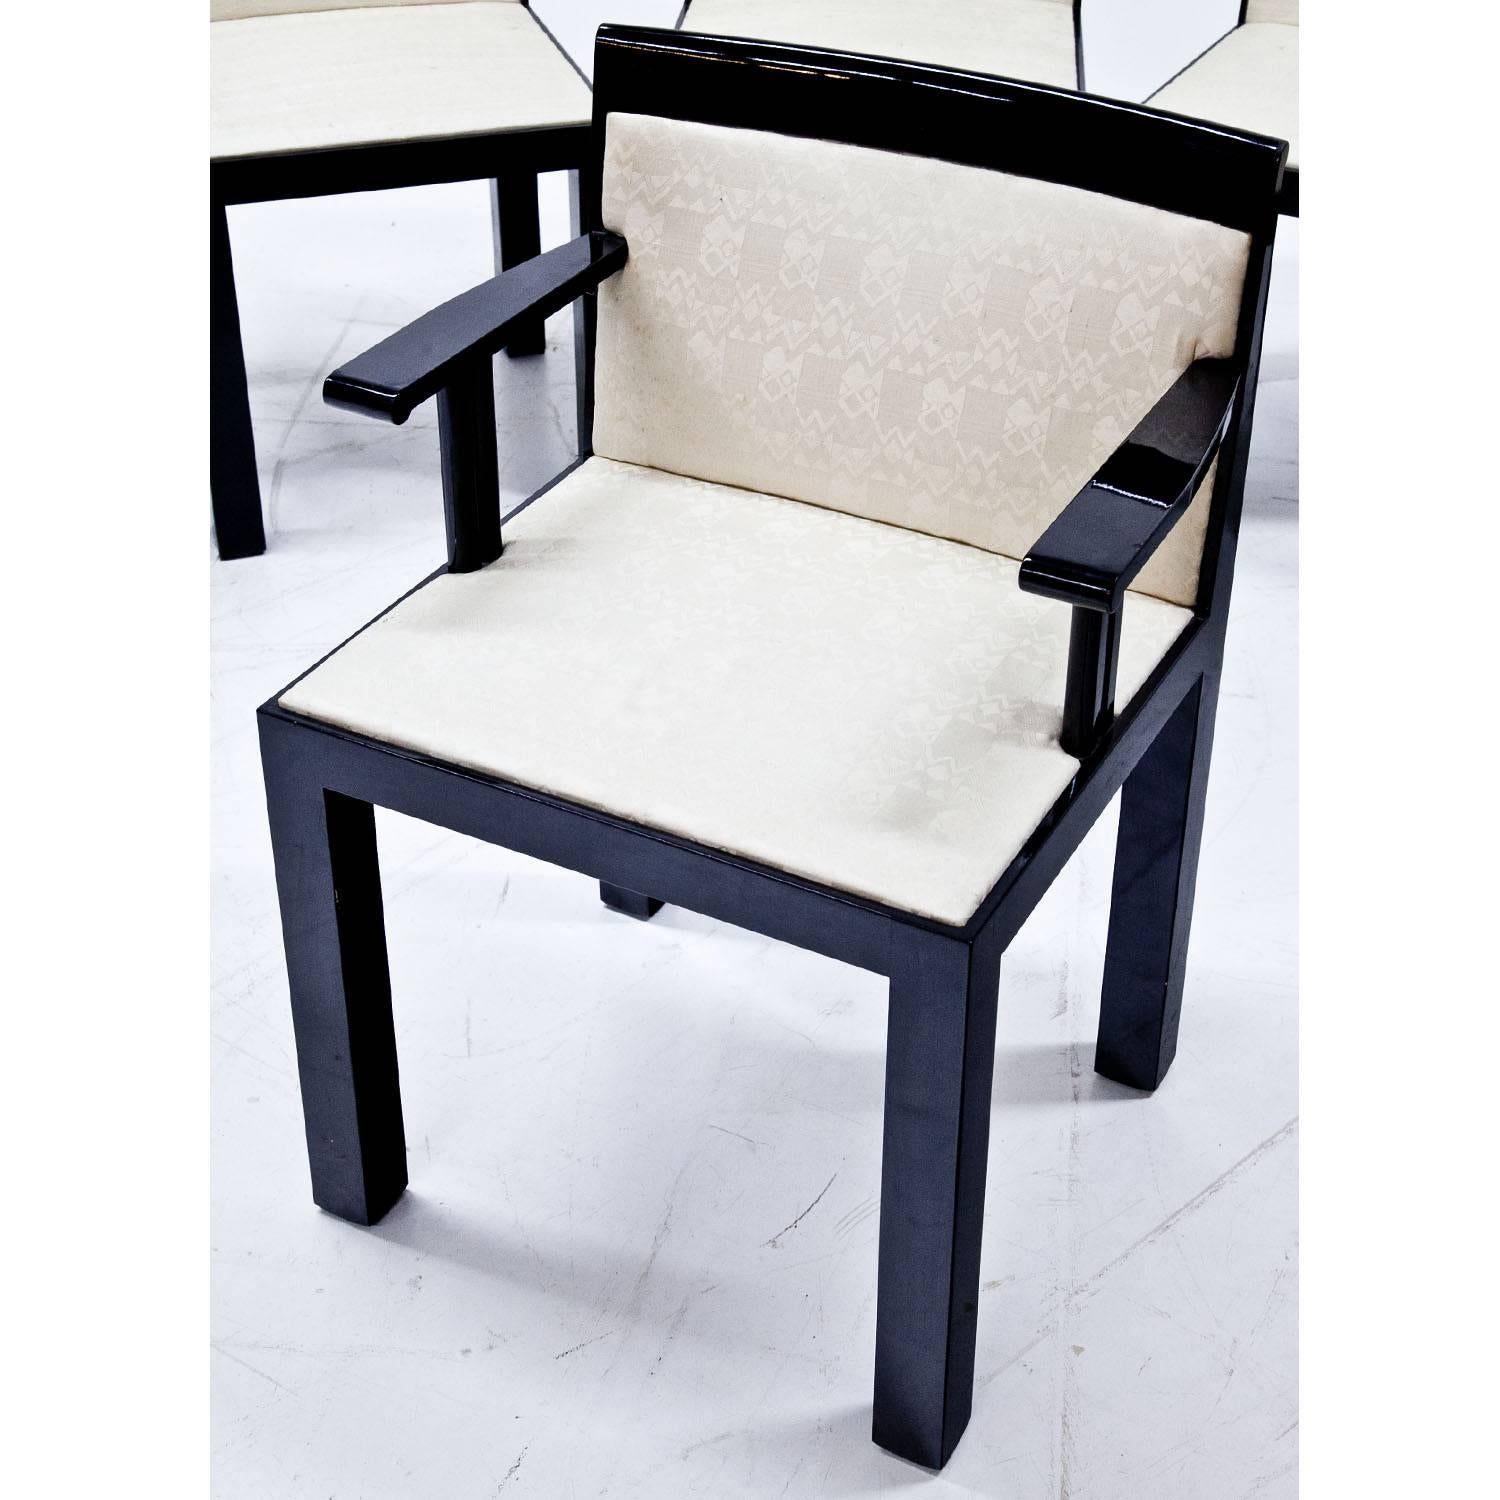 Set of four 'Teatro' chairs and two armchairs by Aldo Rossi with ebonized straight legs and armrests. The beige fabric is original and is in a used condition.